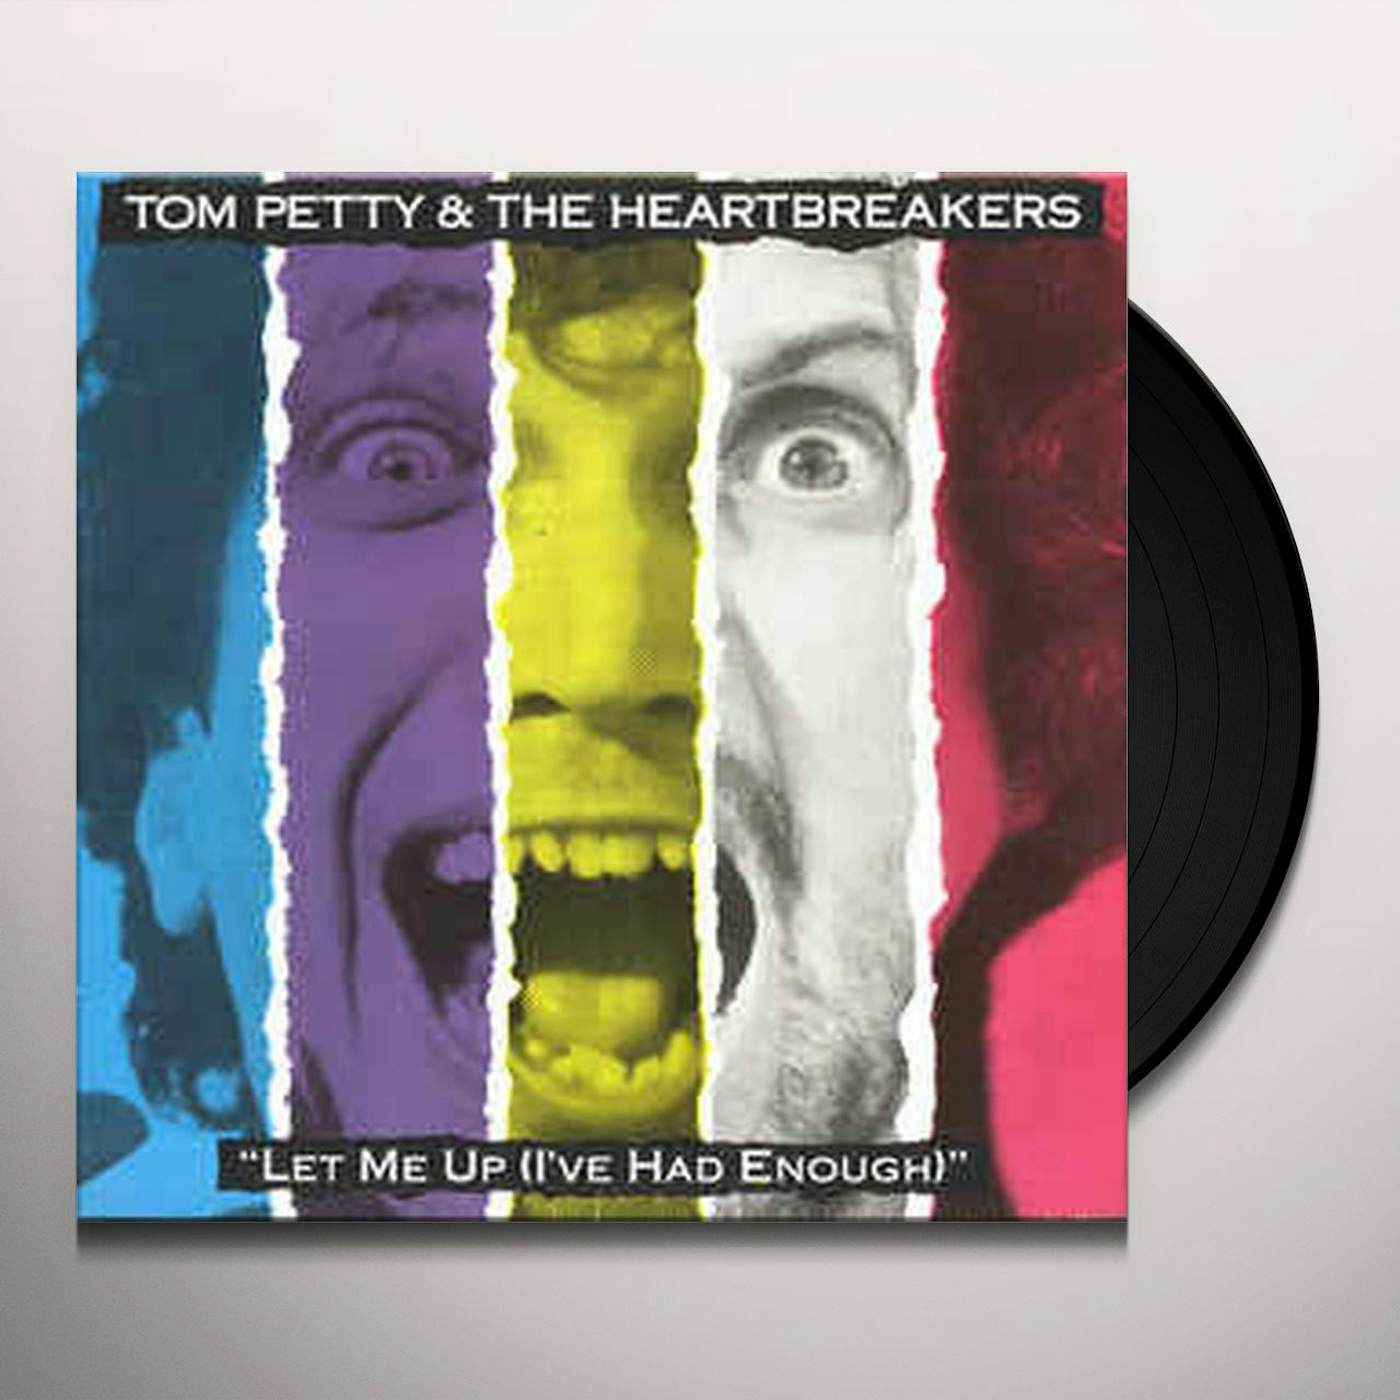 Tom Petty and the Heartbreakers Let Me Up (I've Had Enough) Vinyl Record